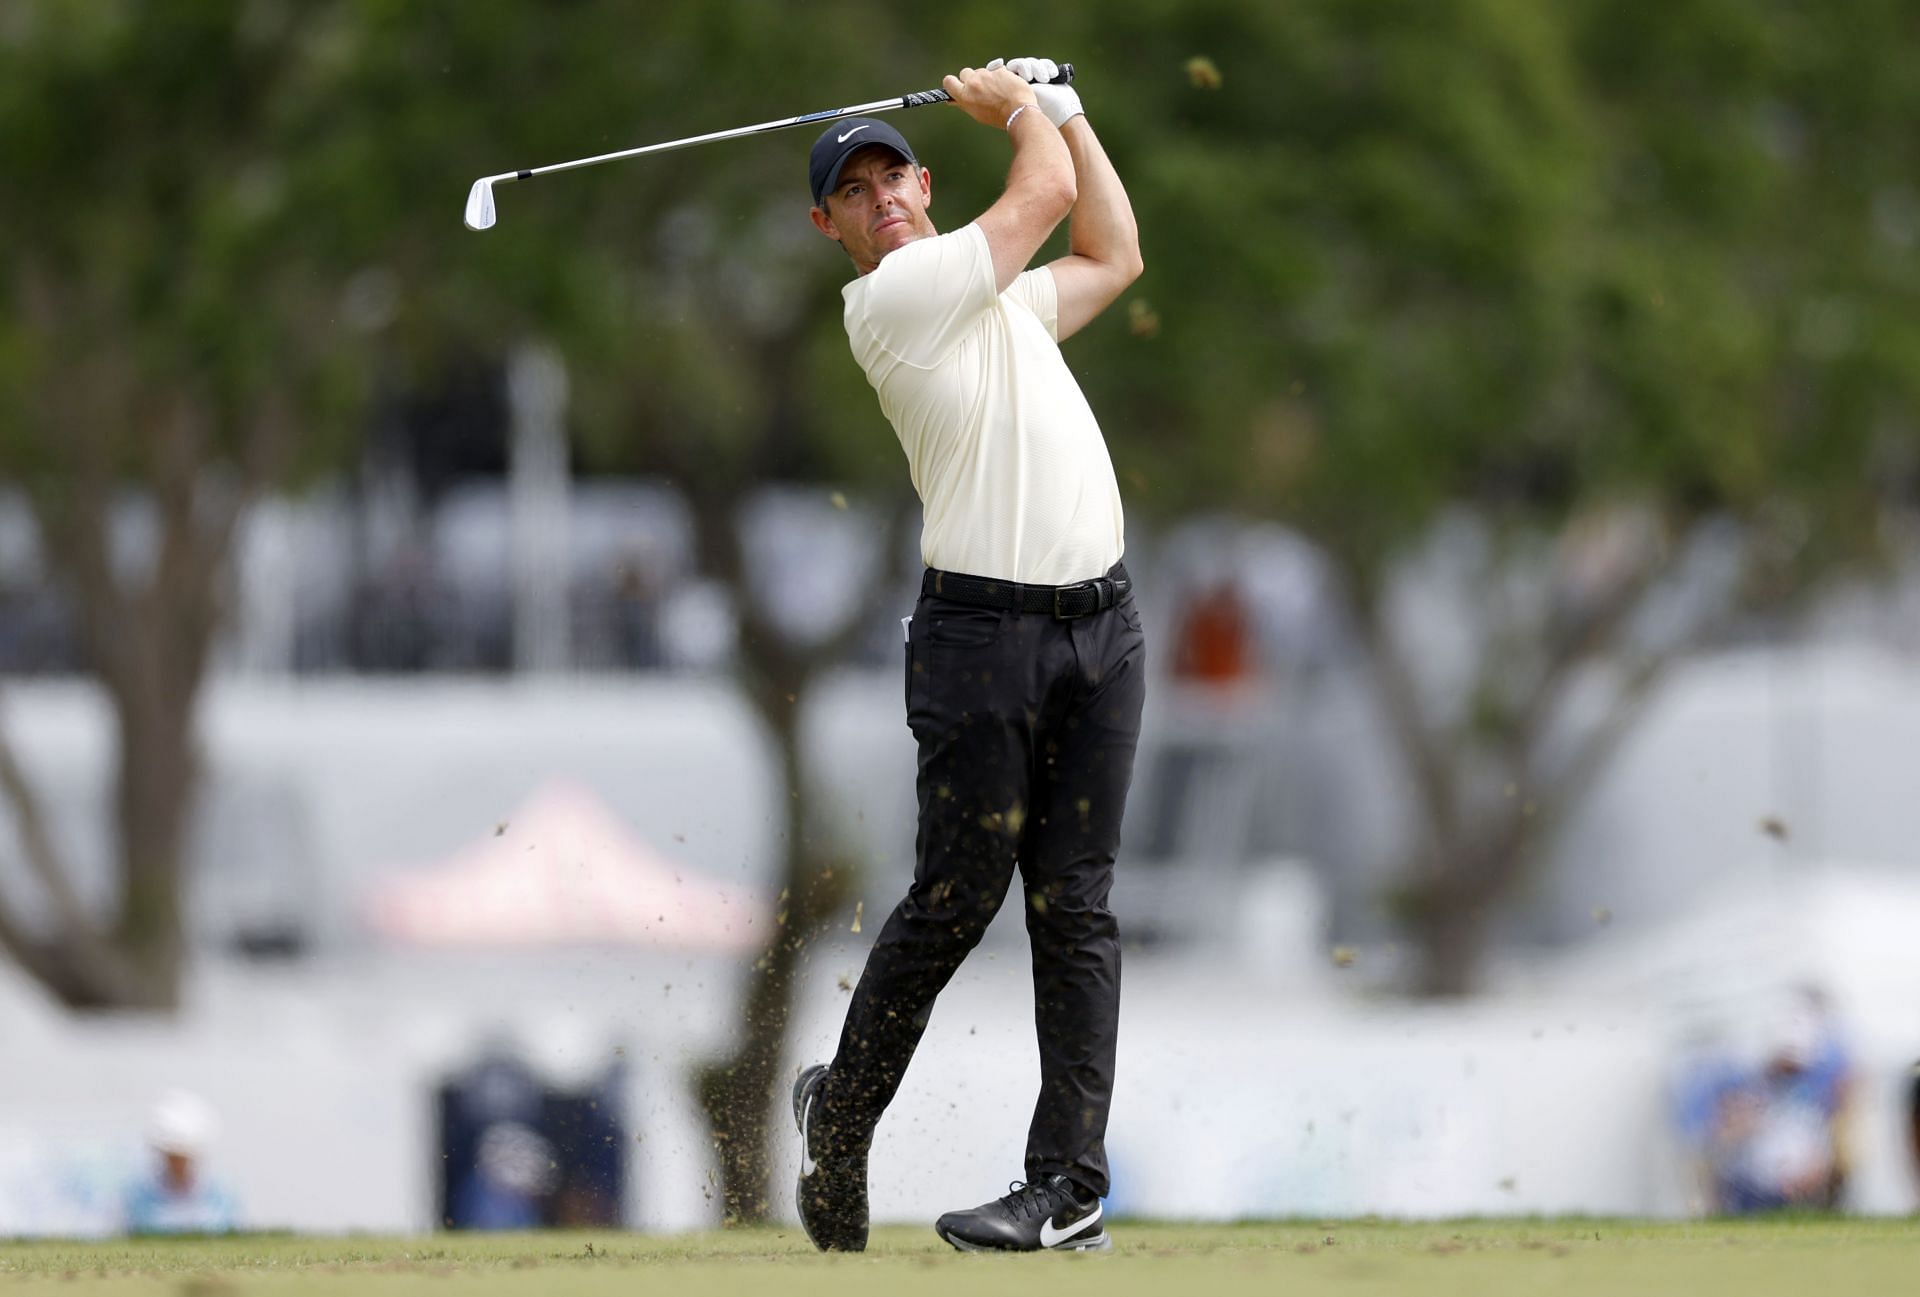 Rory McIlroy did fine in the Cognizant Classic